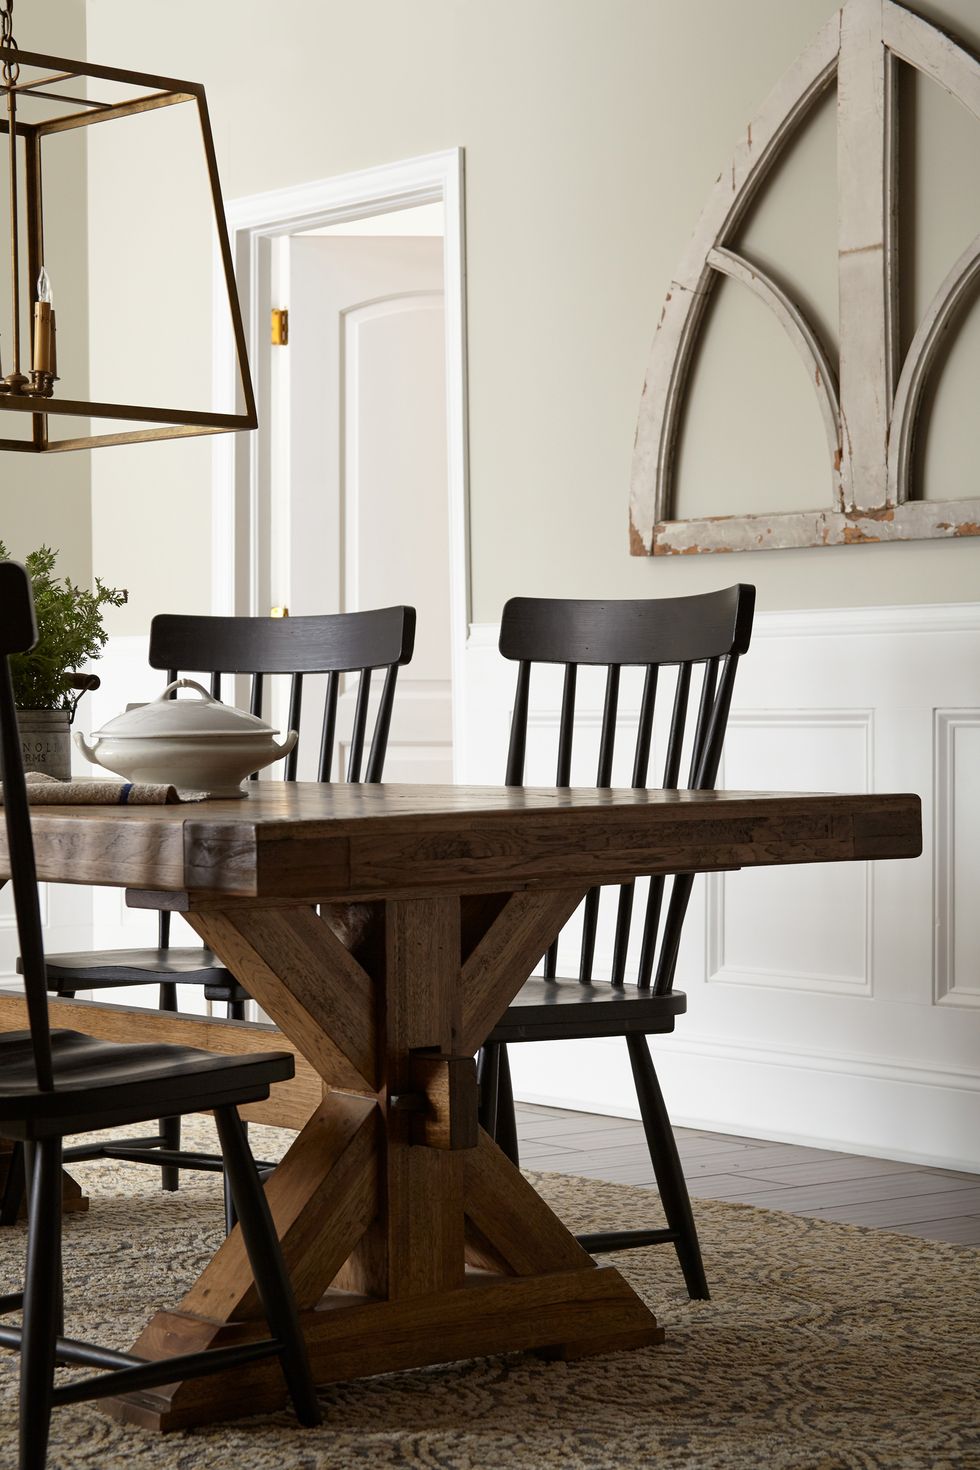 Furniture, Room, Chair, Table, Kitchen & dining room table, Dining room, Interior design, Windsor chair, Outdoor table, Wood, 